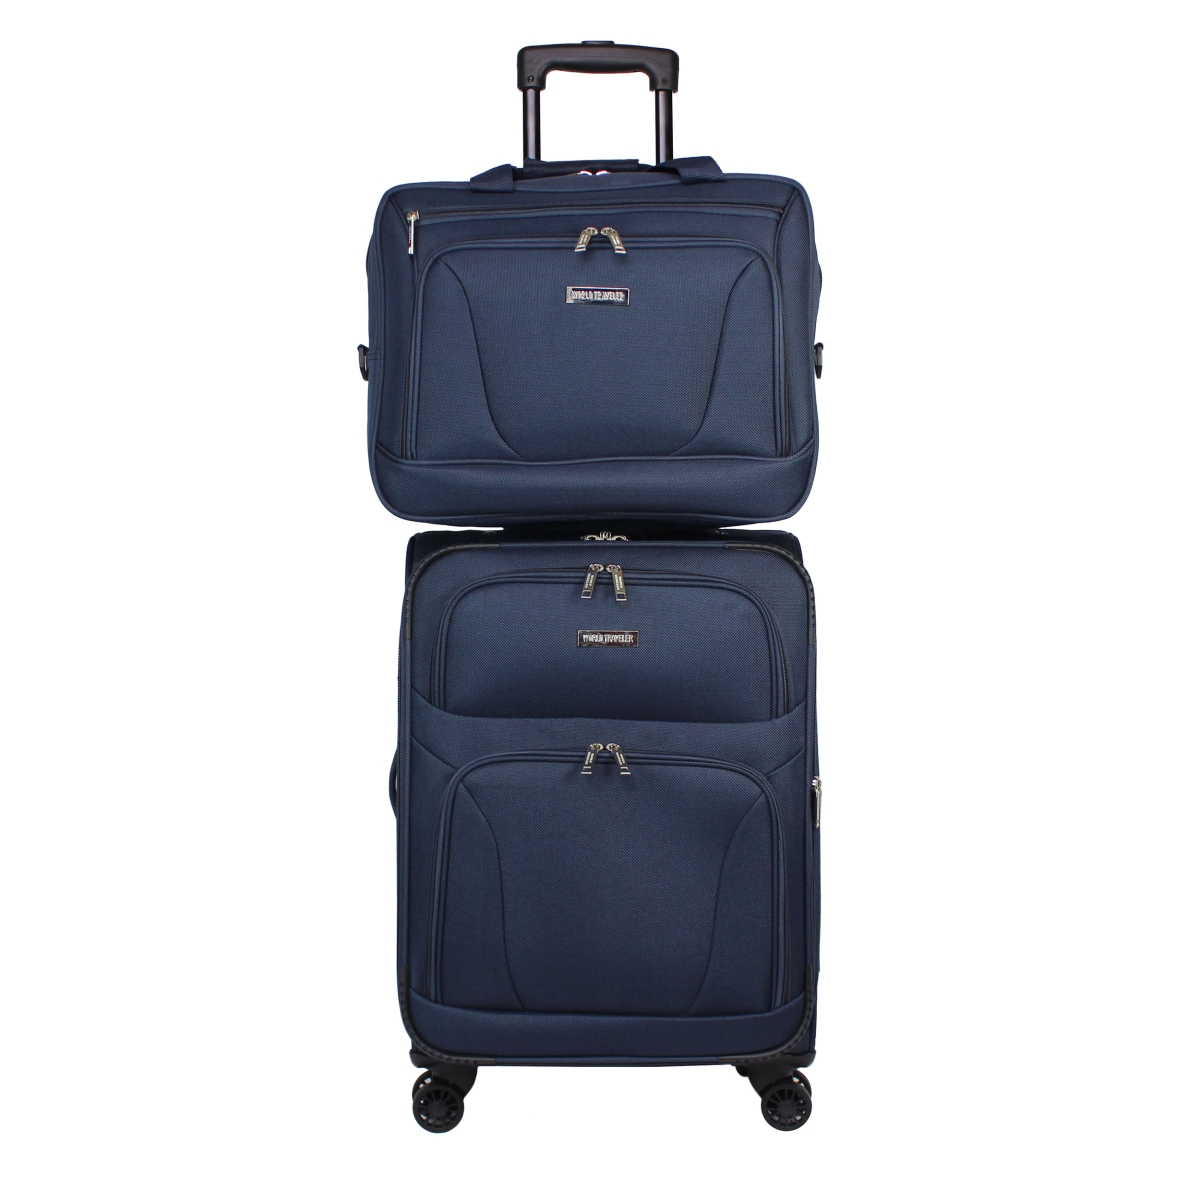 Wt100-2-navy 2 Piece Embarque Collection Super Lightweight Carry-on Spinner Luggage Set - Navy